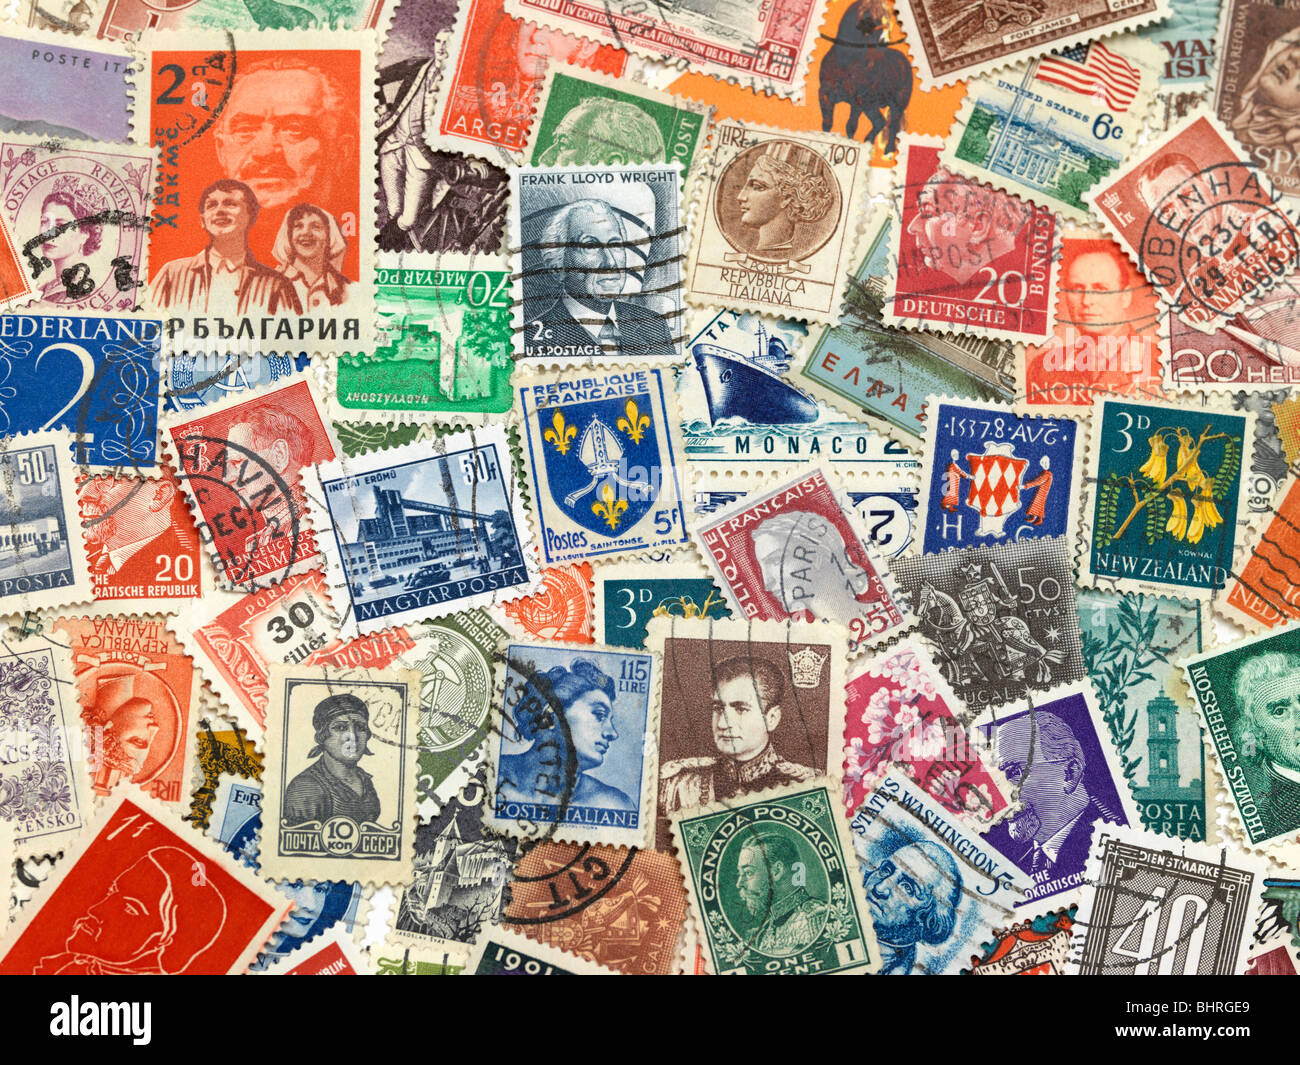 international postage stamps of the world, still life collection Stock Photo